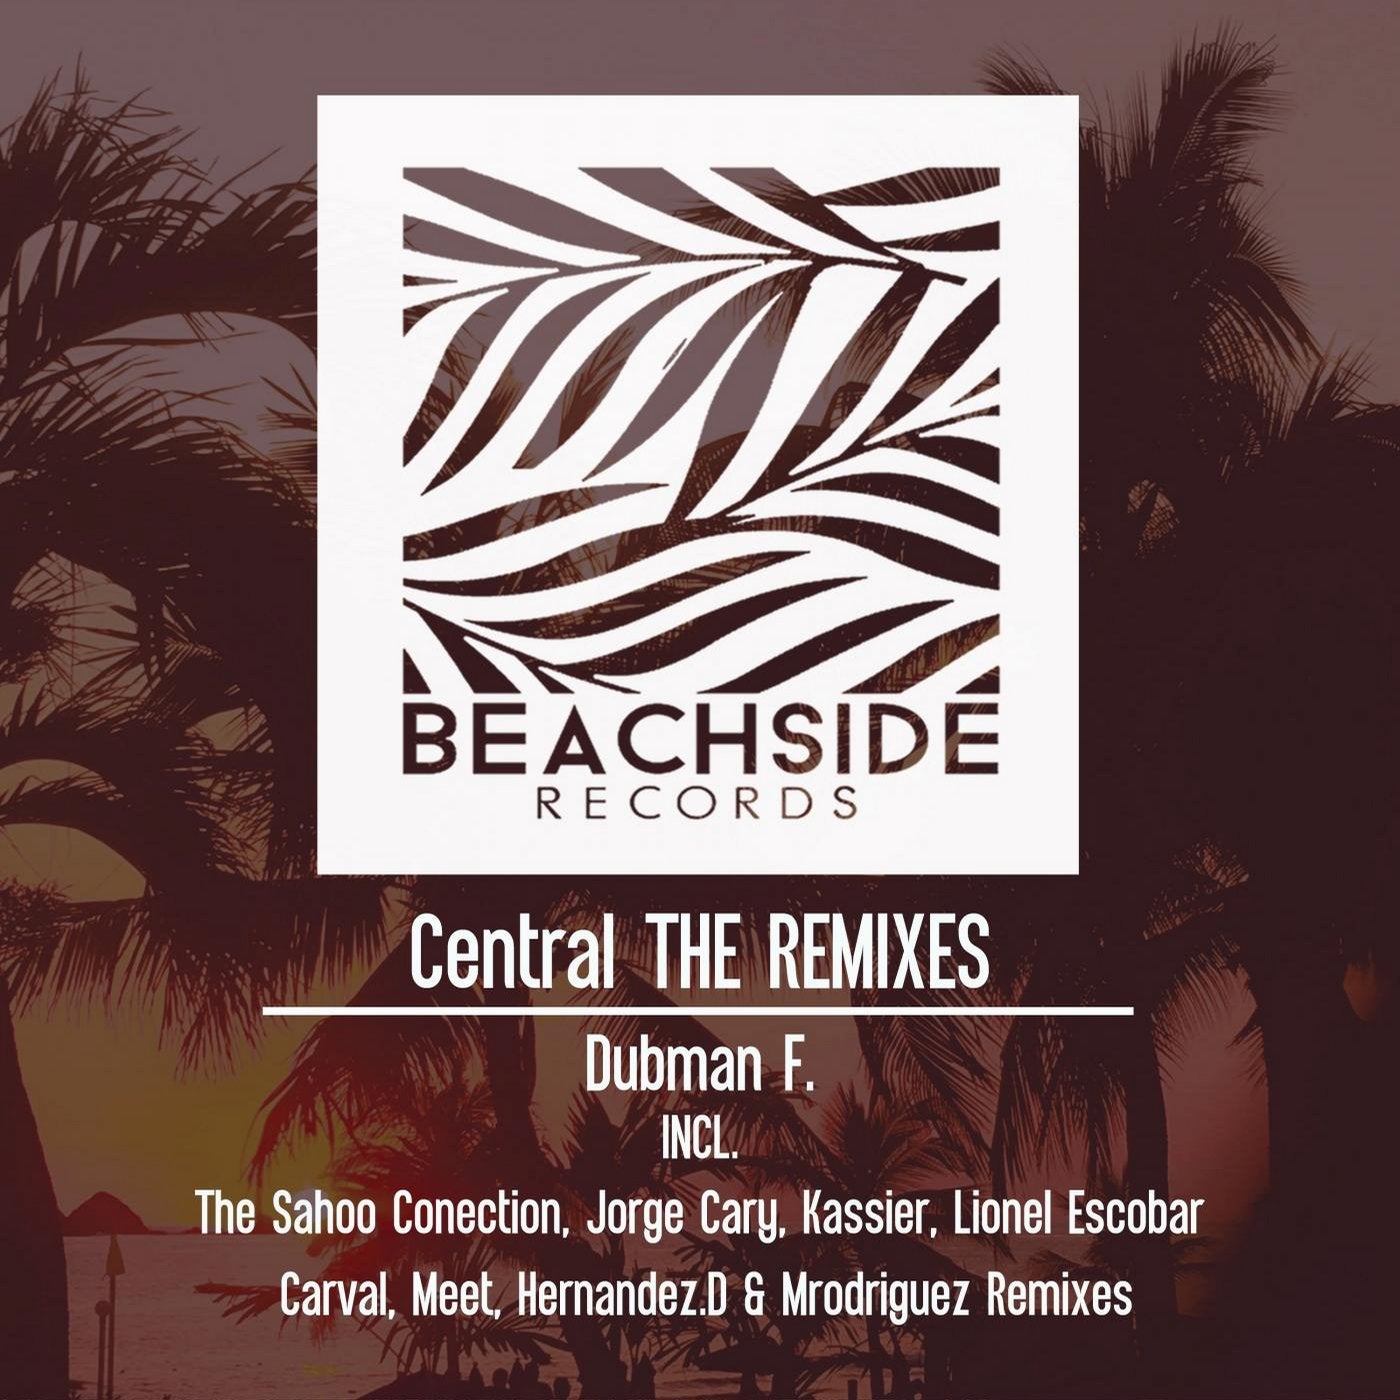 Central THE REMIXES